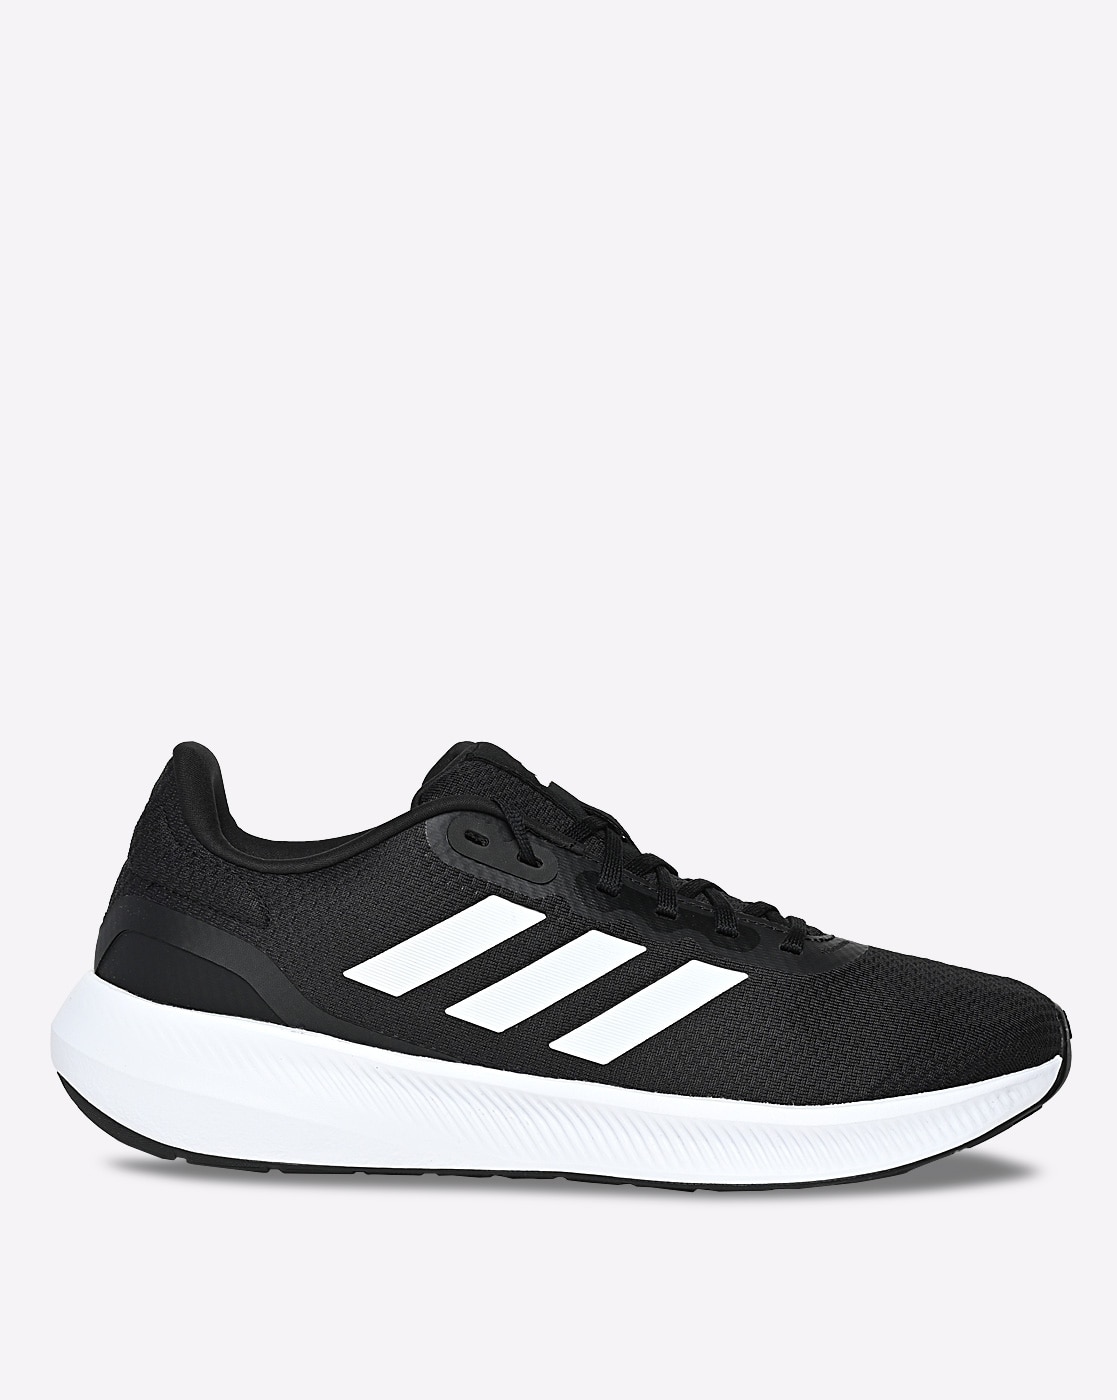 Buy Black Sports by ADIDAS Men for Shoes Online